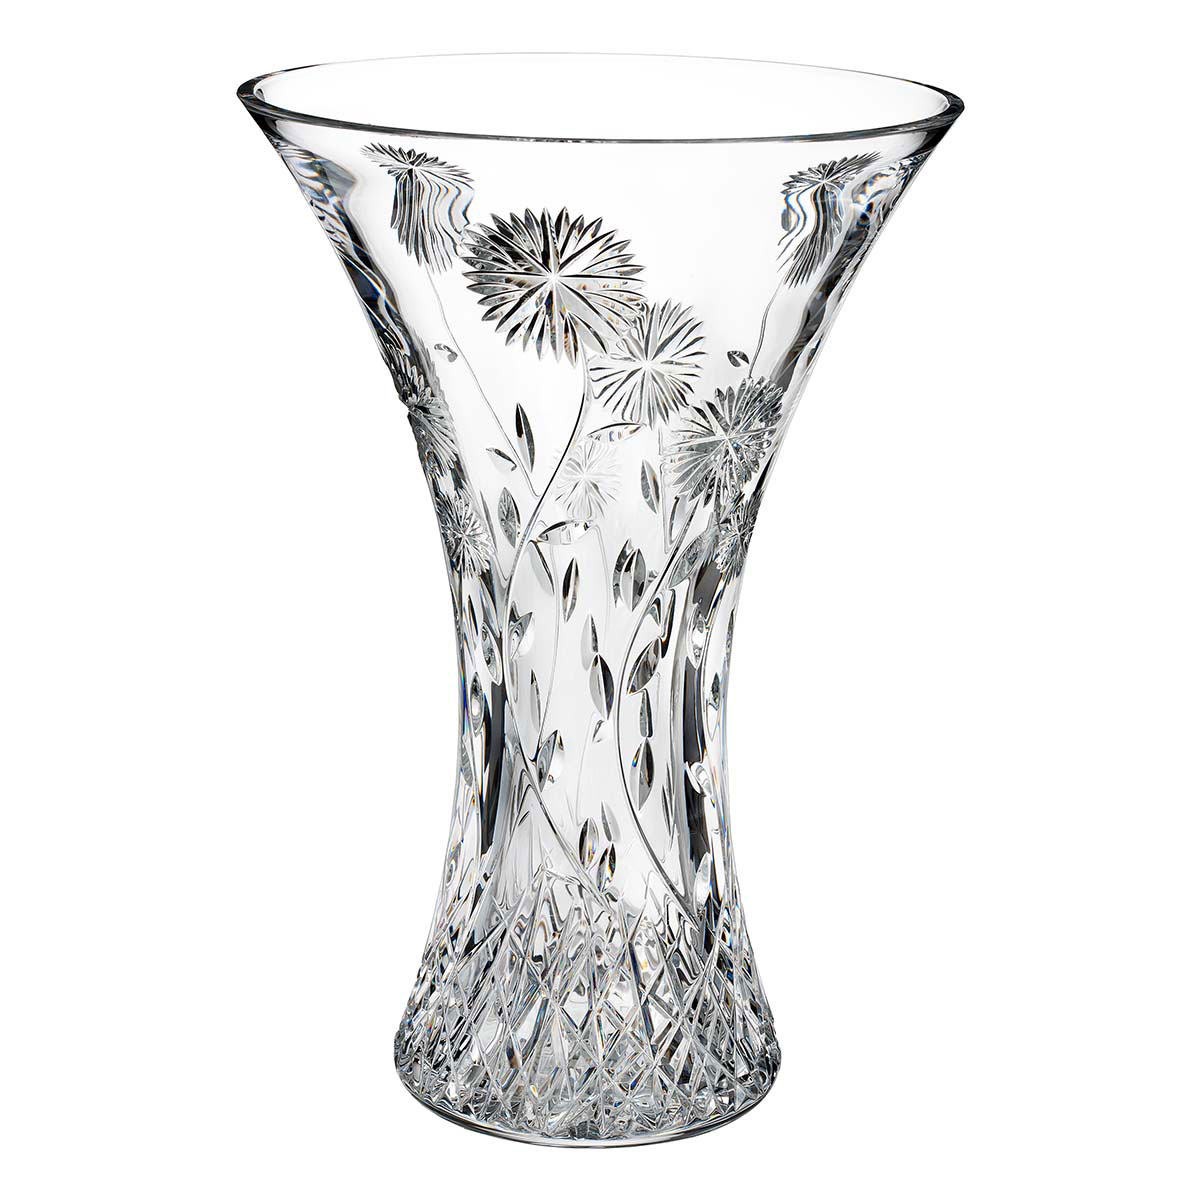 Waterford Crystal, House of Waterford Matt Kehoe Dahlia 14" Crystal Vase, Limited Edition of 400